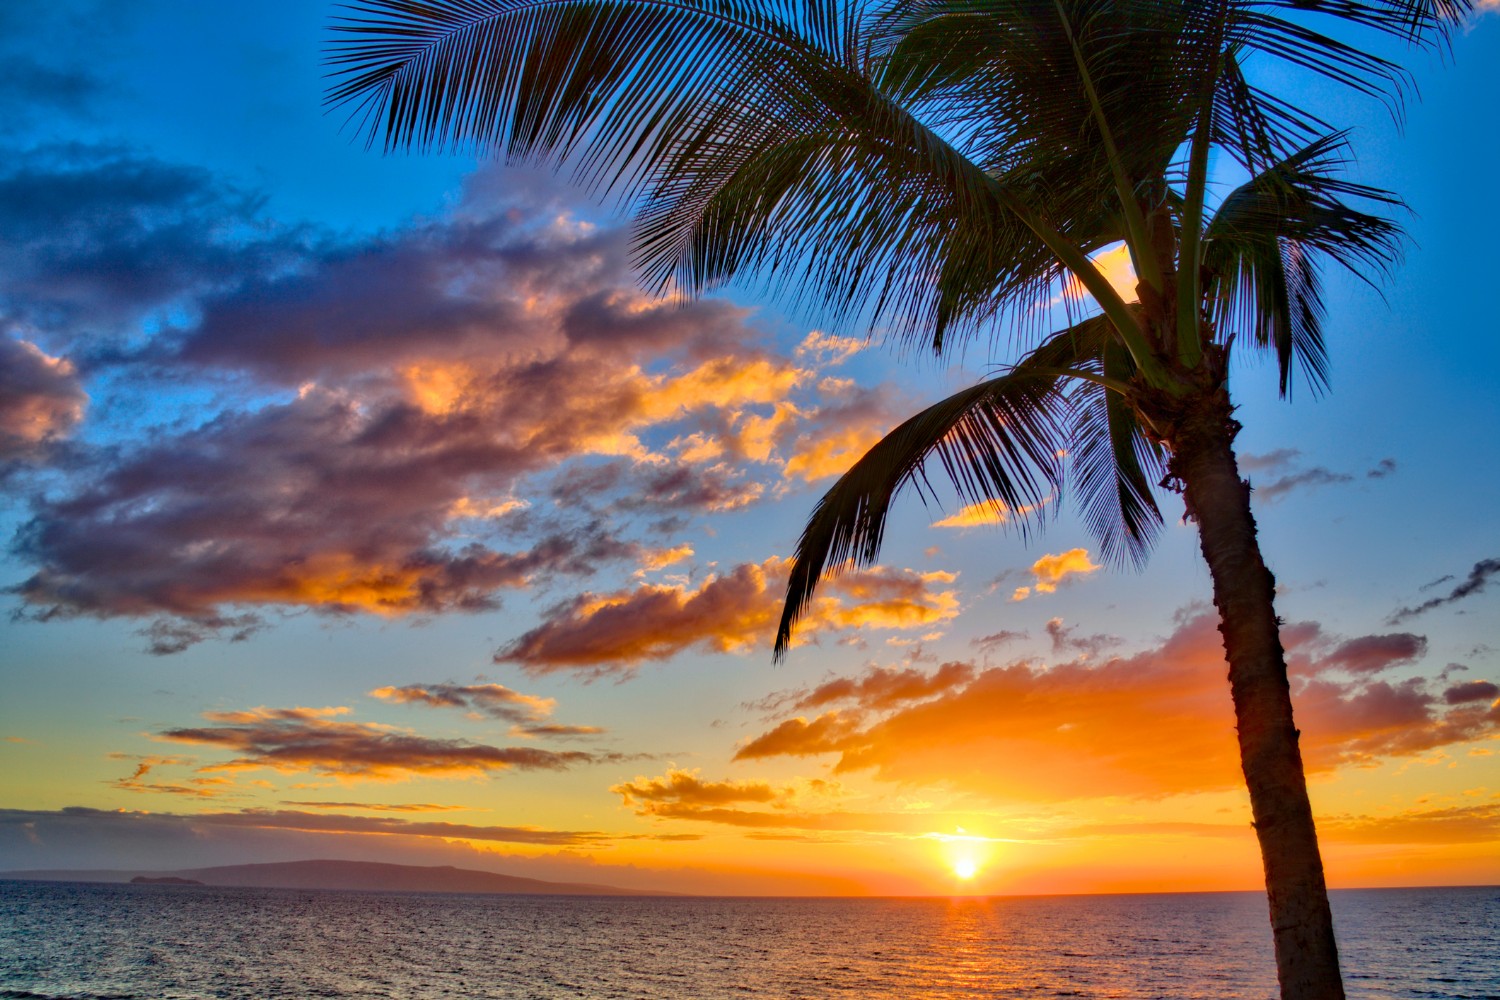 Sunset View Of Kamaole Beach Park With Palm Tree Overlooking The Ocean